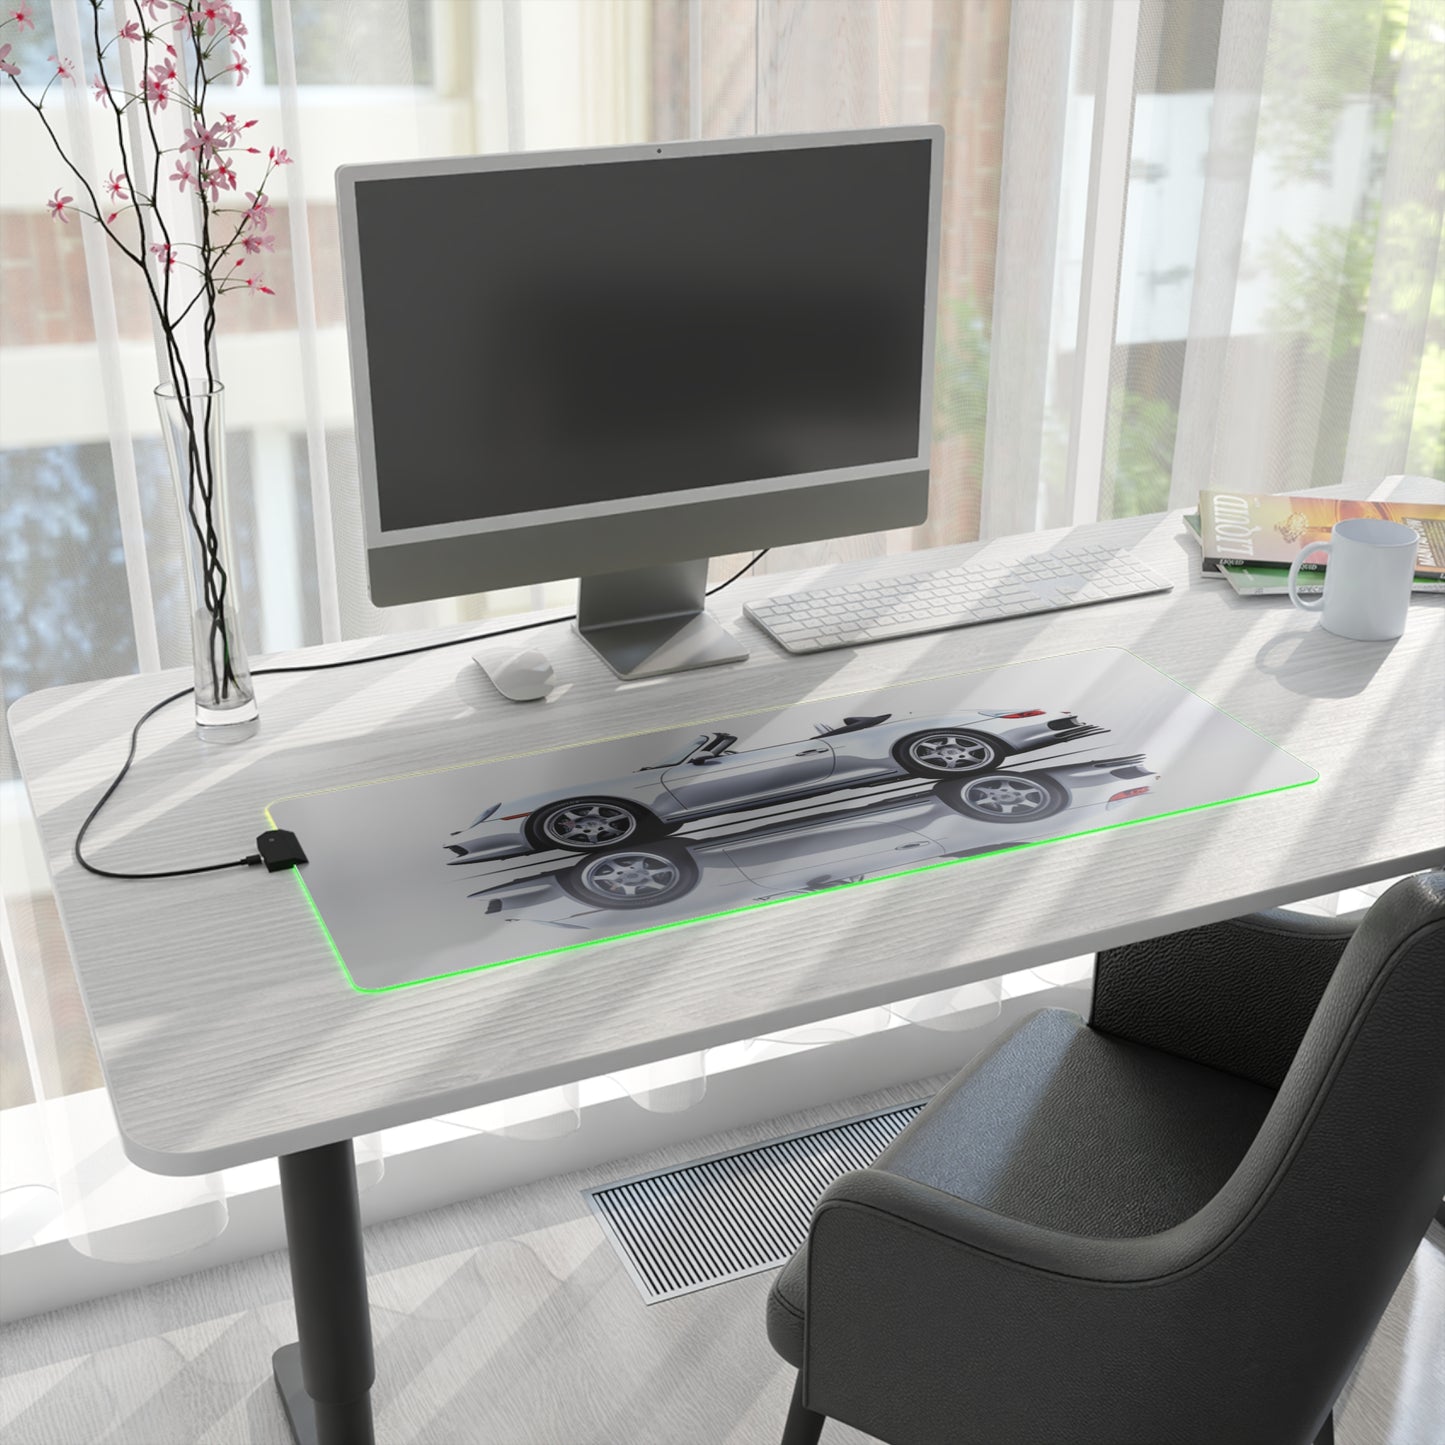 LED Gaming Mouse Pad 911 Speedster on water 3